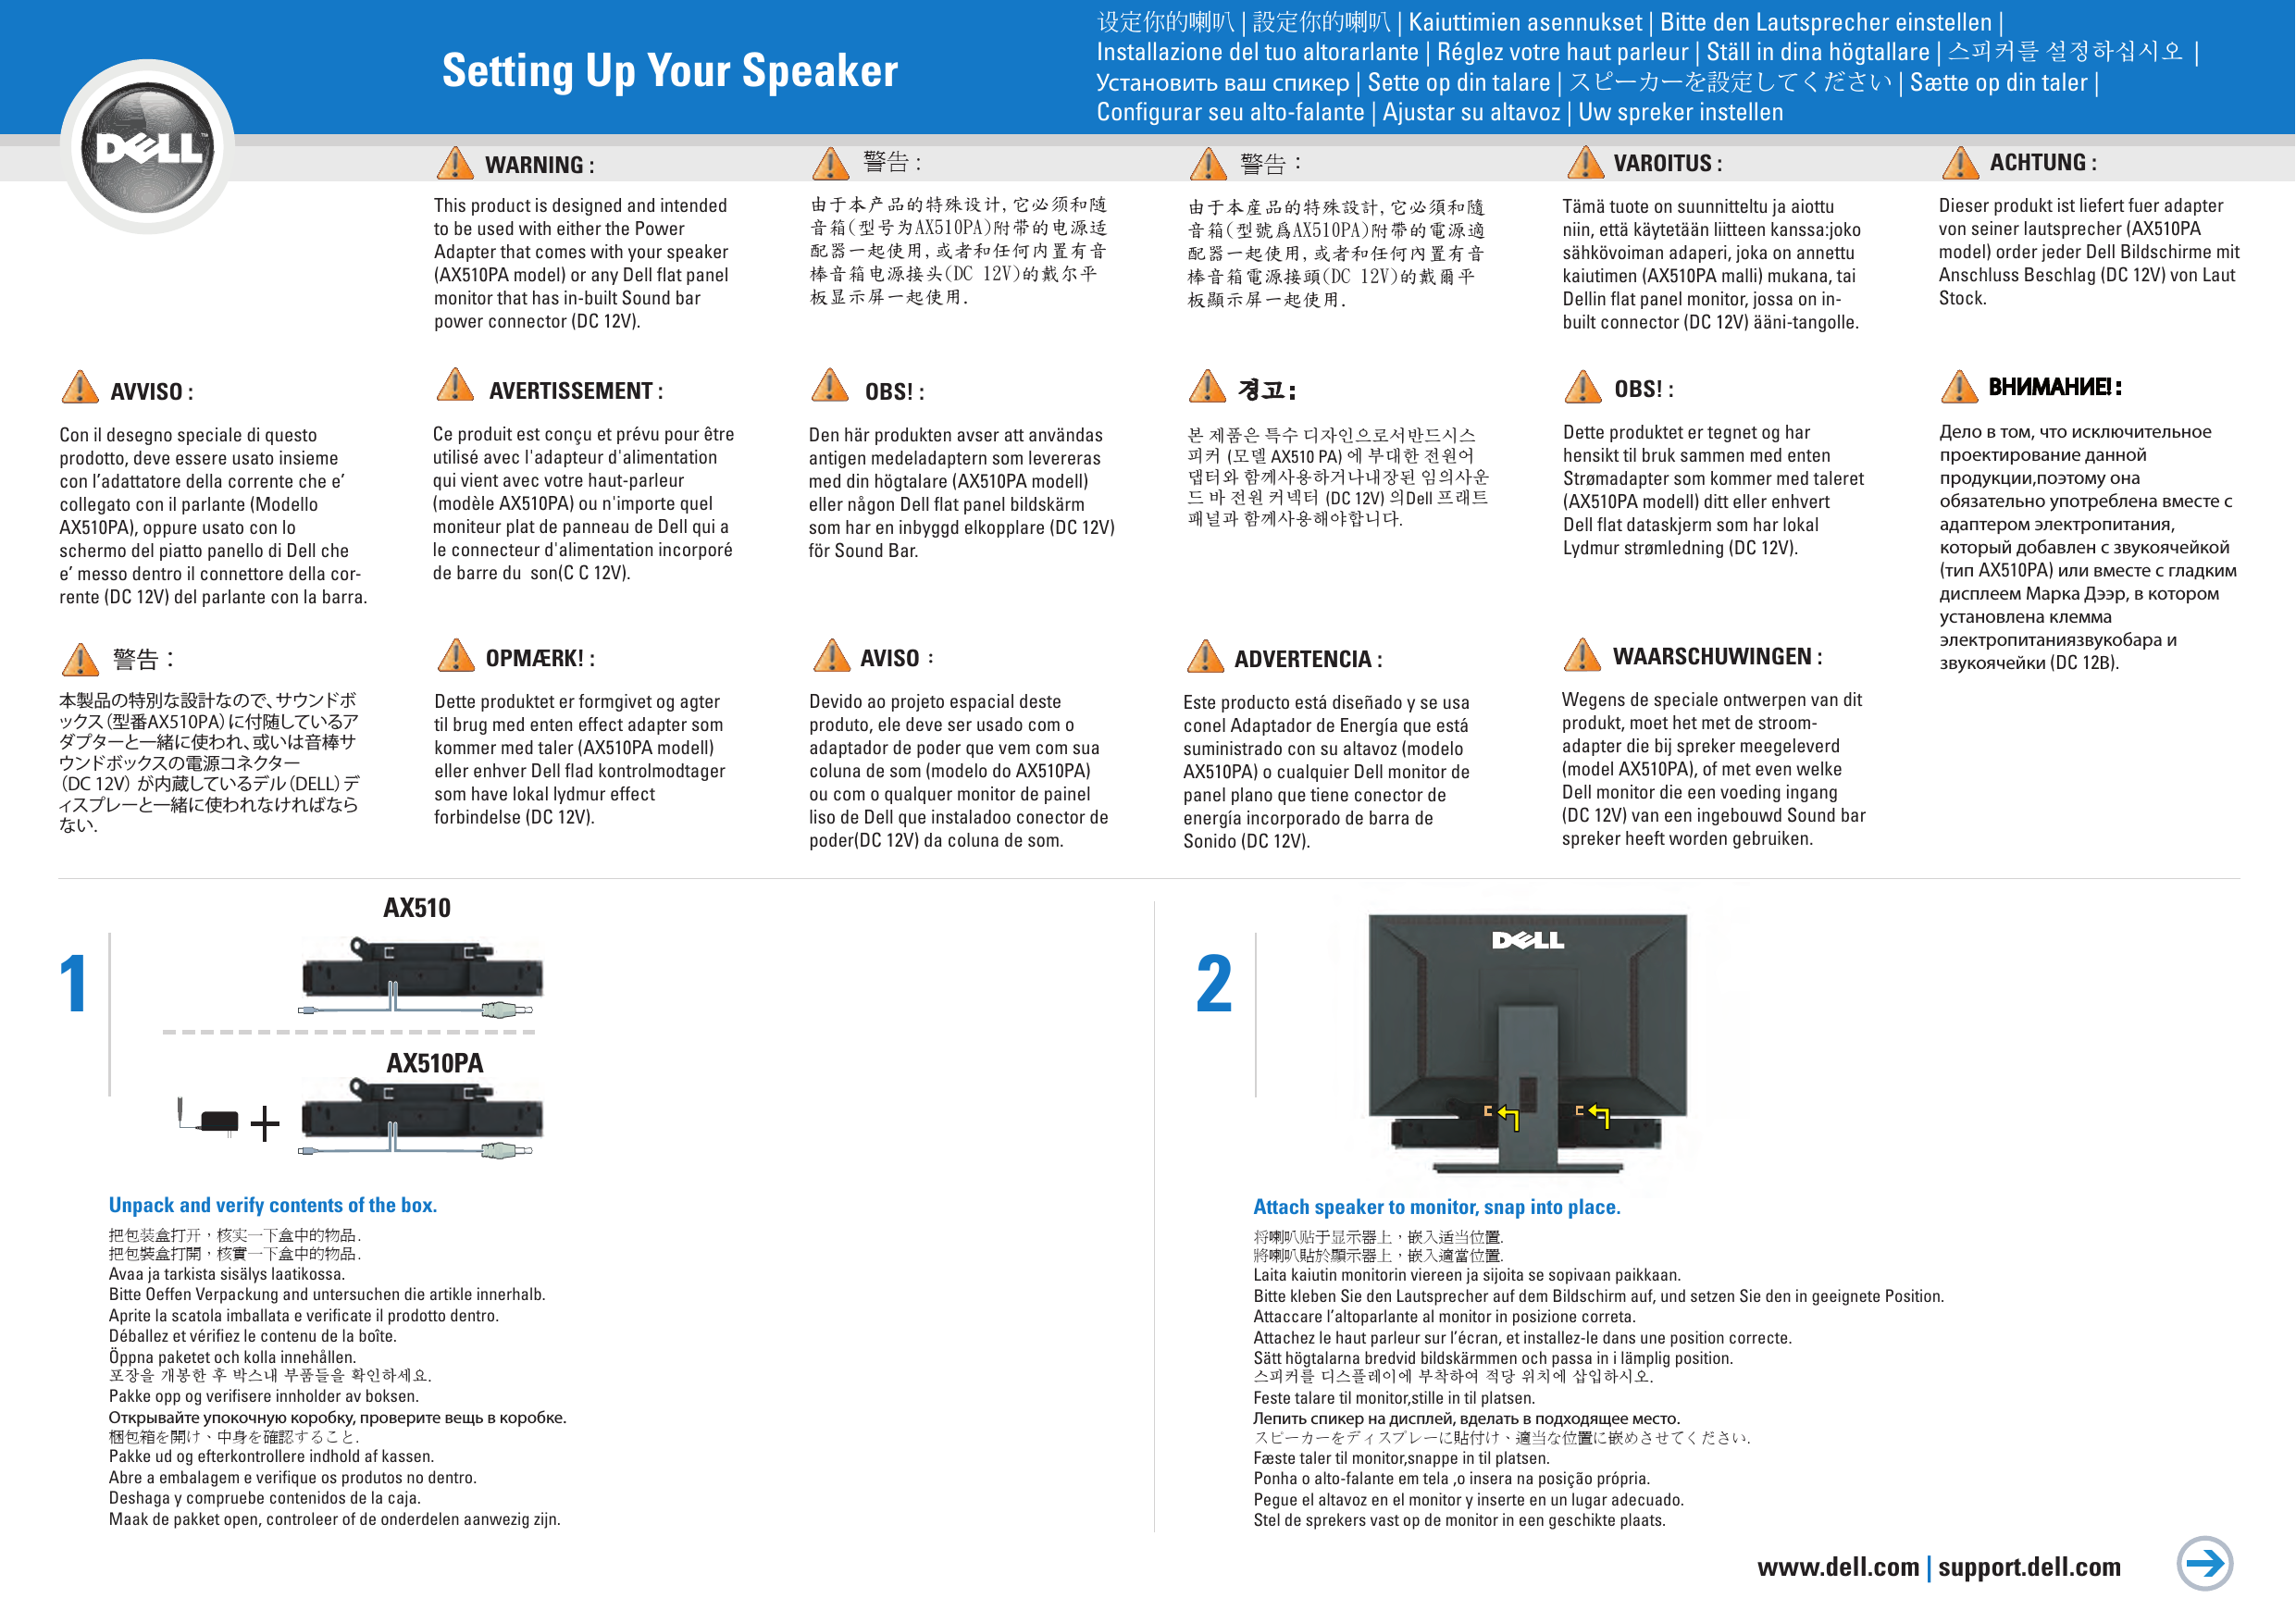 Page 1 of 2 - Dell Dell-Ax510-Ax510-Pa-Stereo-Soundbar-Speaker-System-Quick-Start-Guide- Setting Up Your Speaker  Dell-ax510-ax510-pa-stereo-soundbar-speaker-system-quick-start-guide